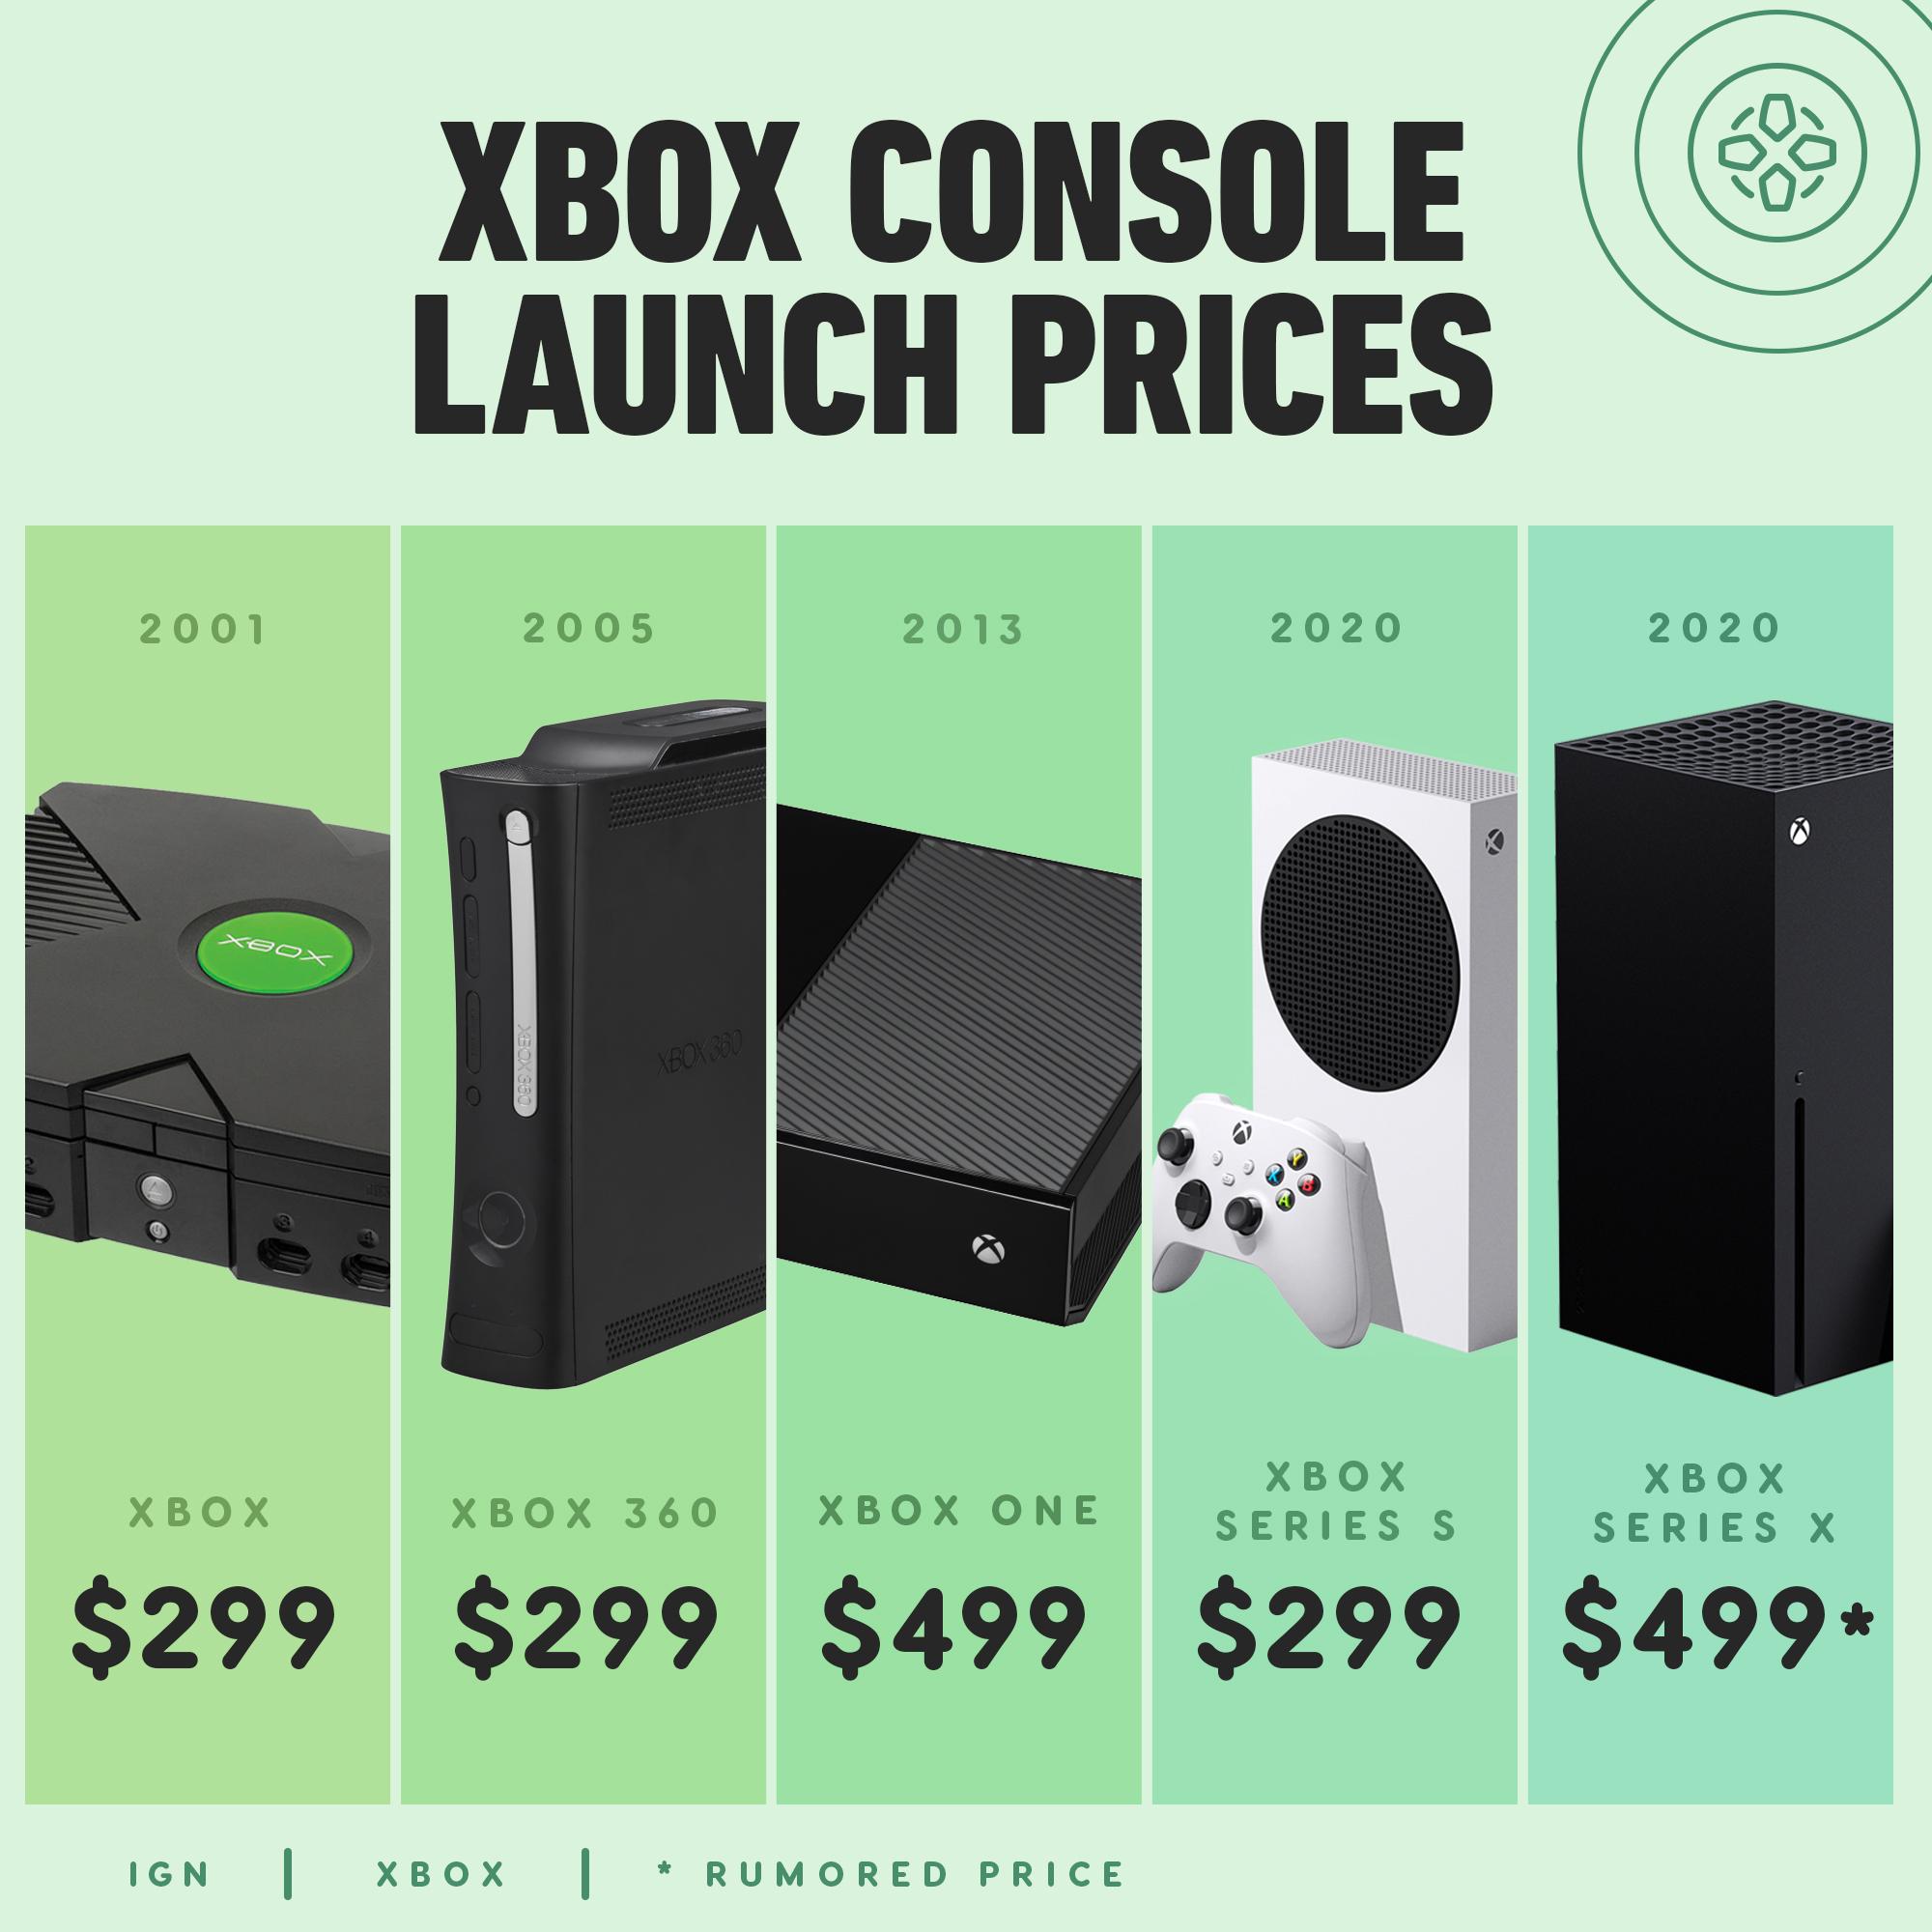 Permanently Tub Take away IGN on Twitter: "With Xbox Series X's price still rumored and Series S  confirmed after being leaked last night, here is how they compare to the  launch prices of Xbox's base consoles